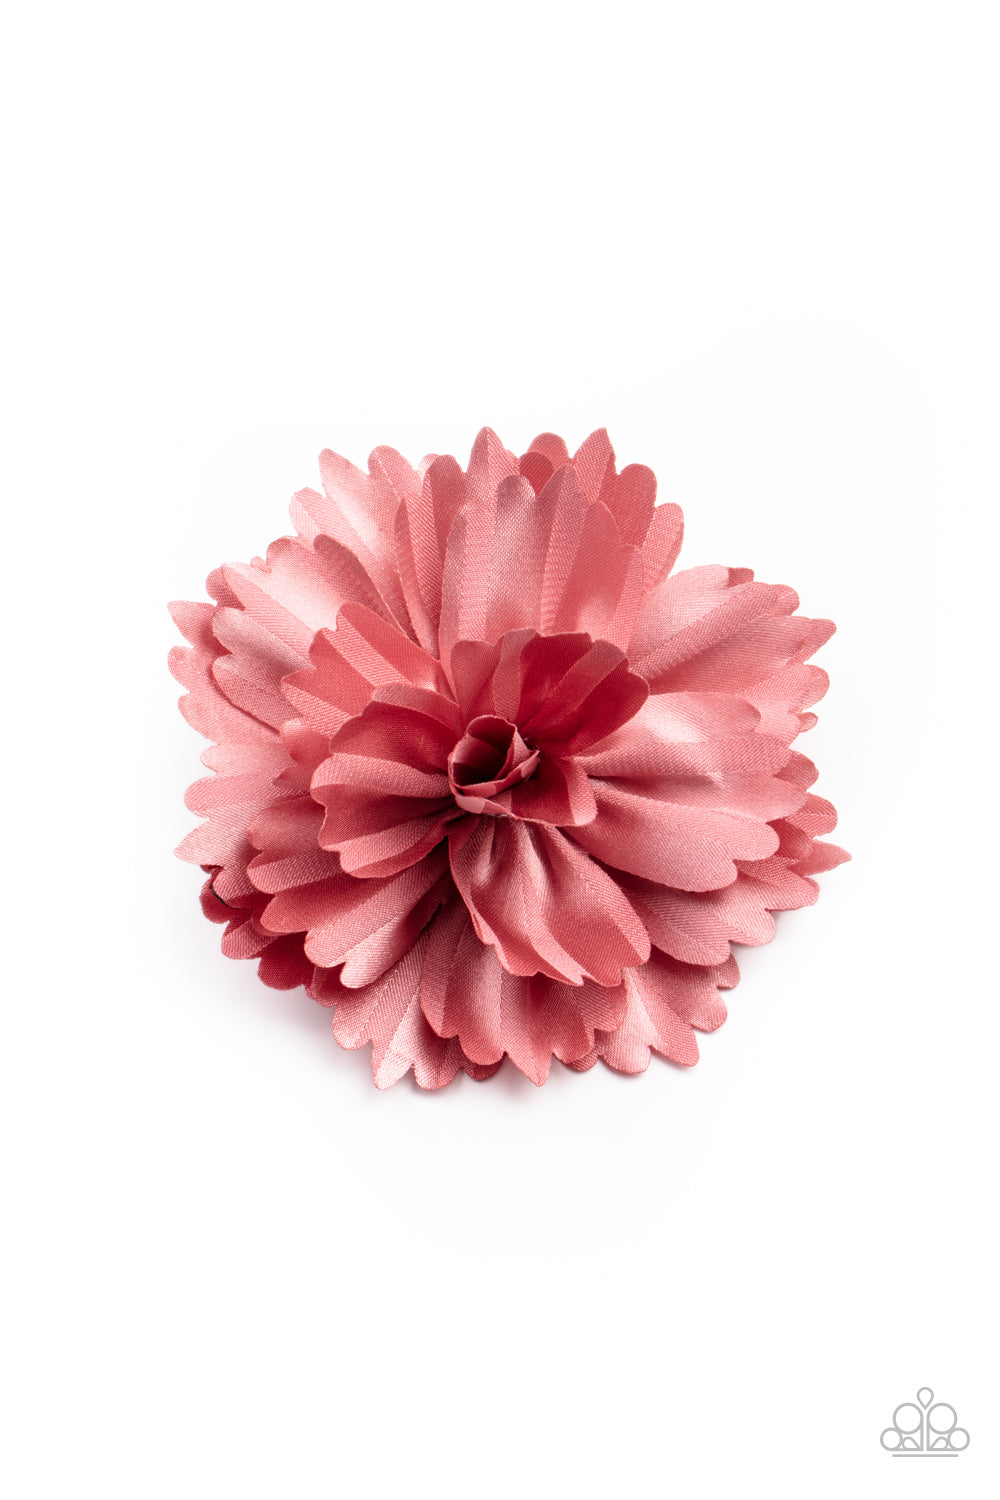 Cutest lil hair flower you ever did see • Layers of scalloped pink petals gather into an elegant satin blossom, creating a timeless display. Features a standard hair clip on the back.